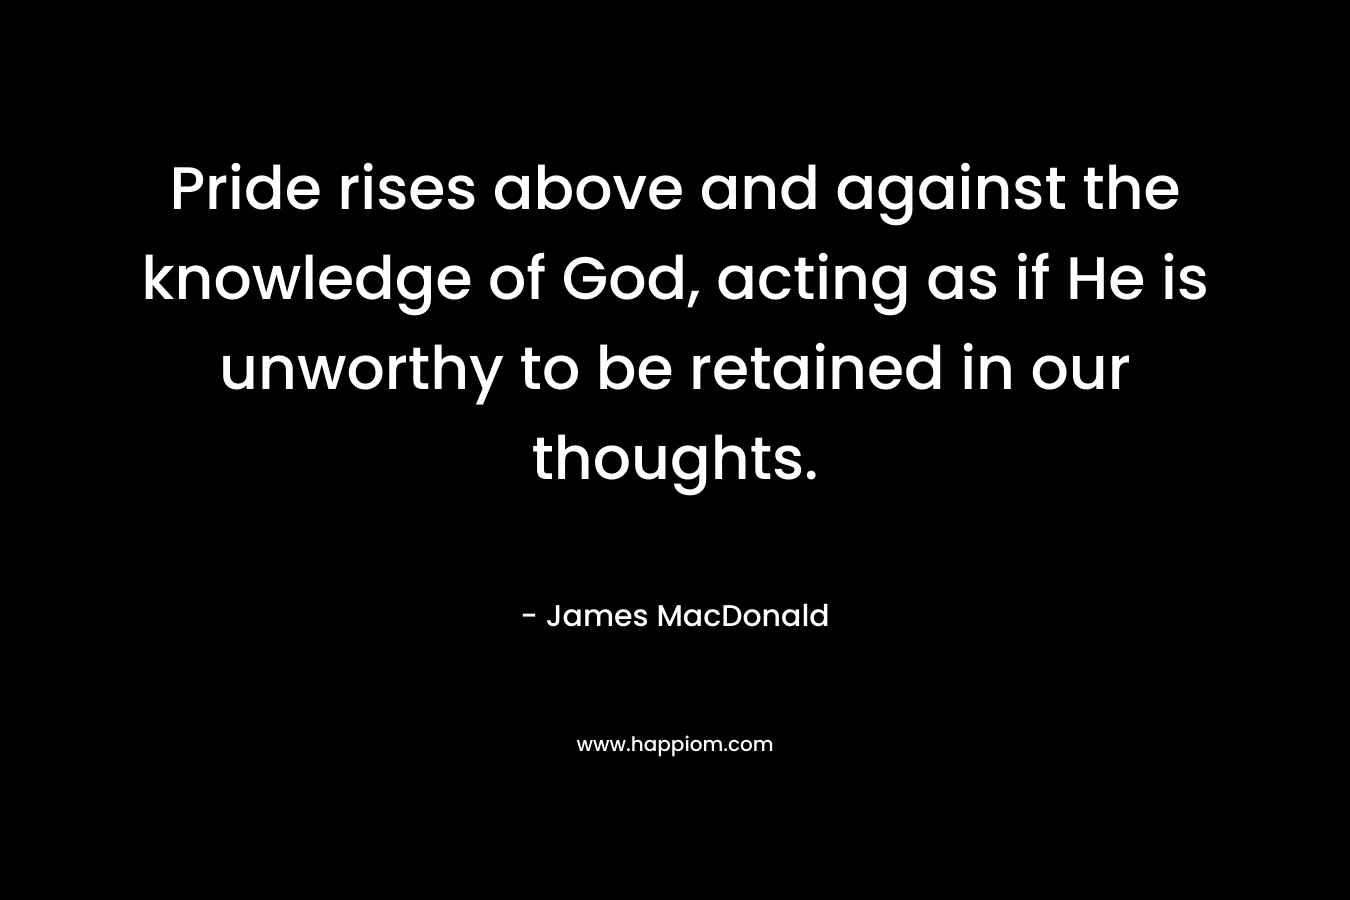 Pride rises above and against the knowledge of God, acting as if He is unworthy to be retained in our thoughts. – James MacDonald